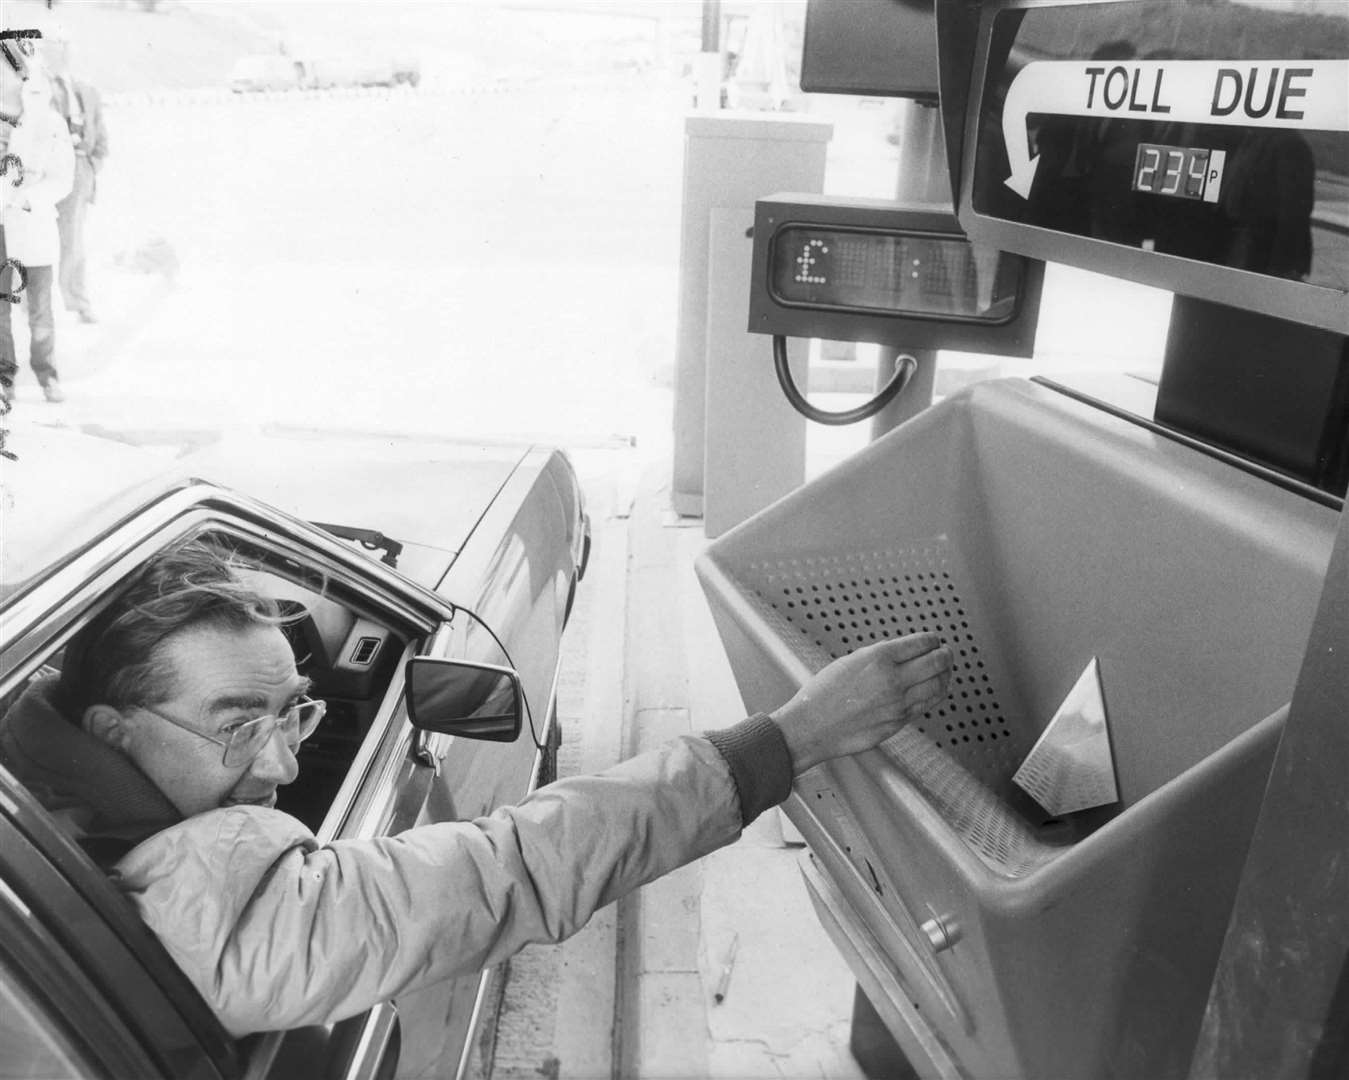 Way before the dart charge online payments were introduced, a driver drops some coins in a toll booth at the Dartford Tunnel in August 1985